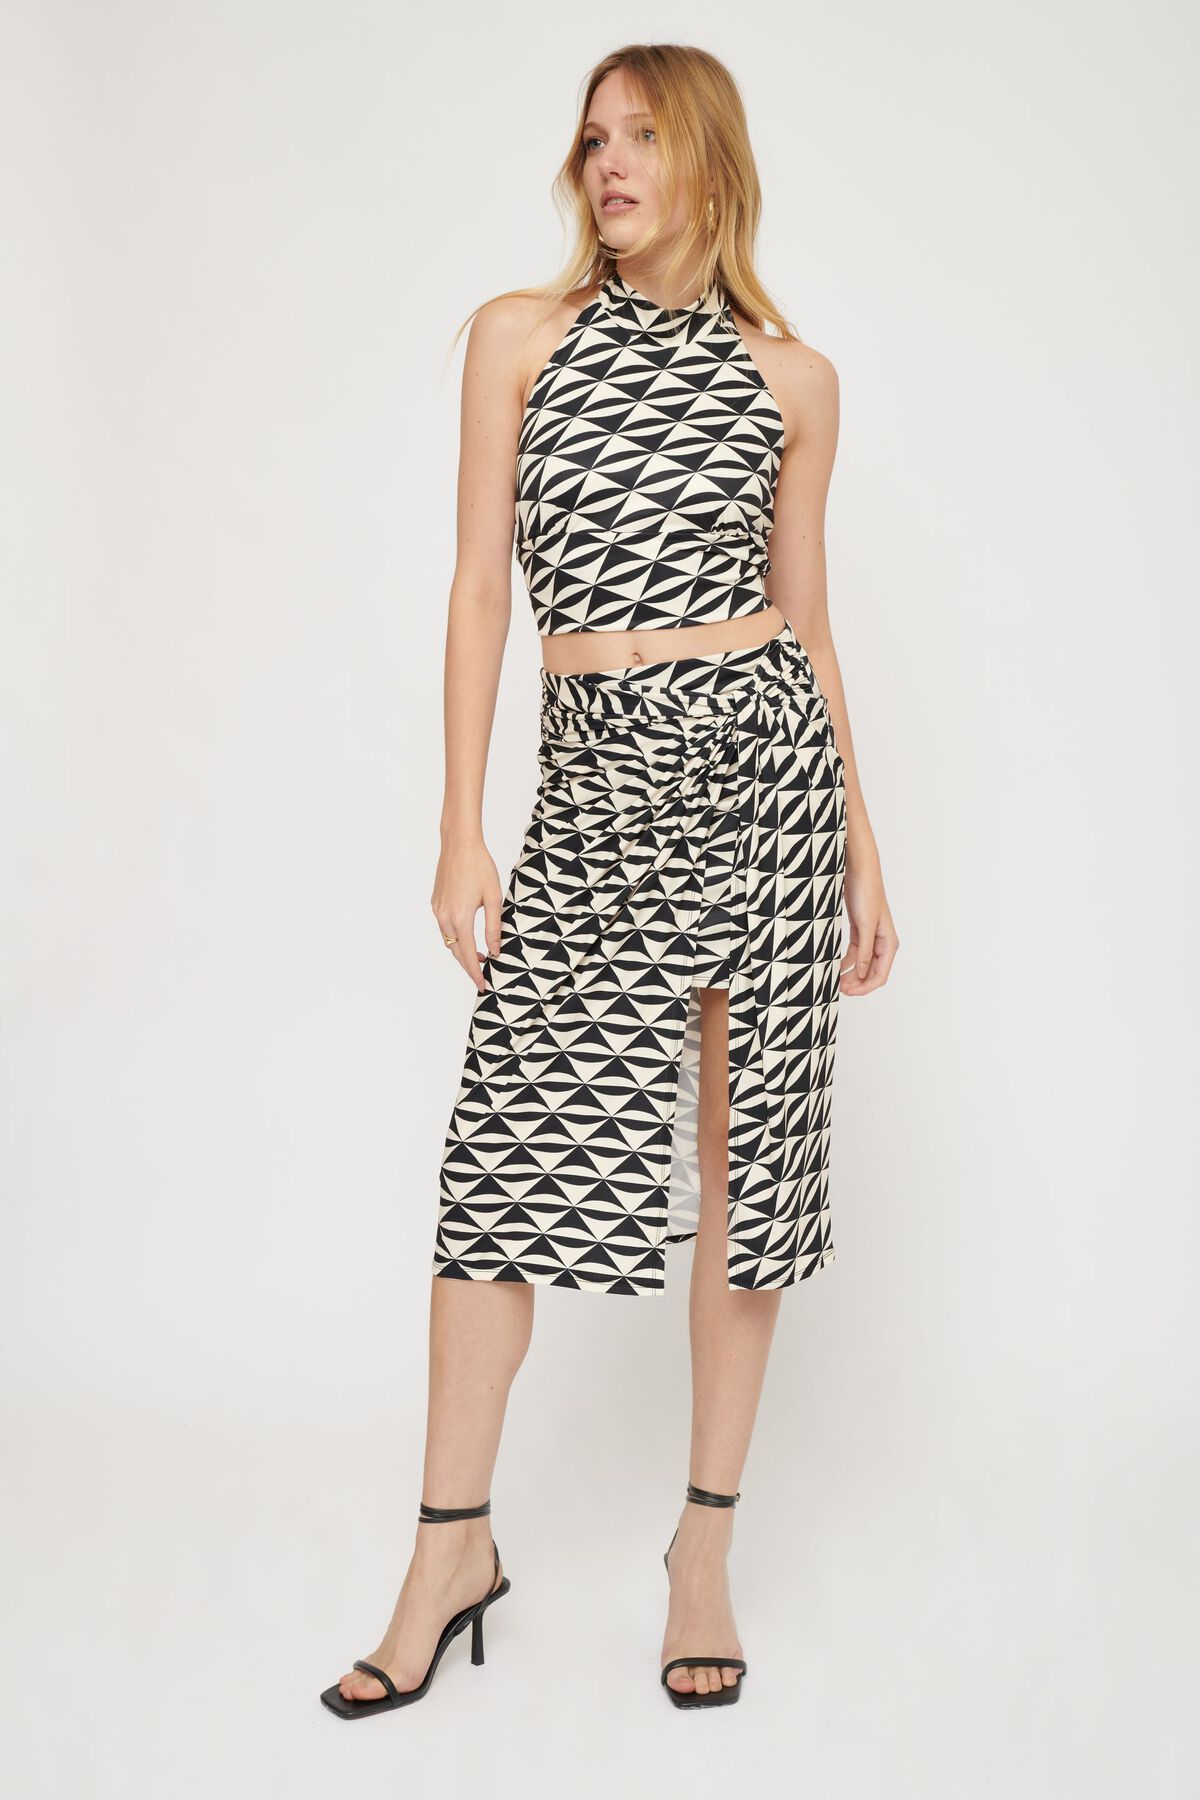 Dynamite Knotted Midi Skirt. 3